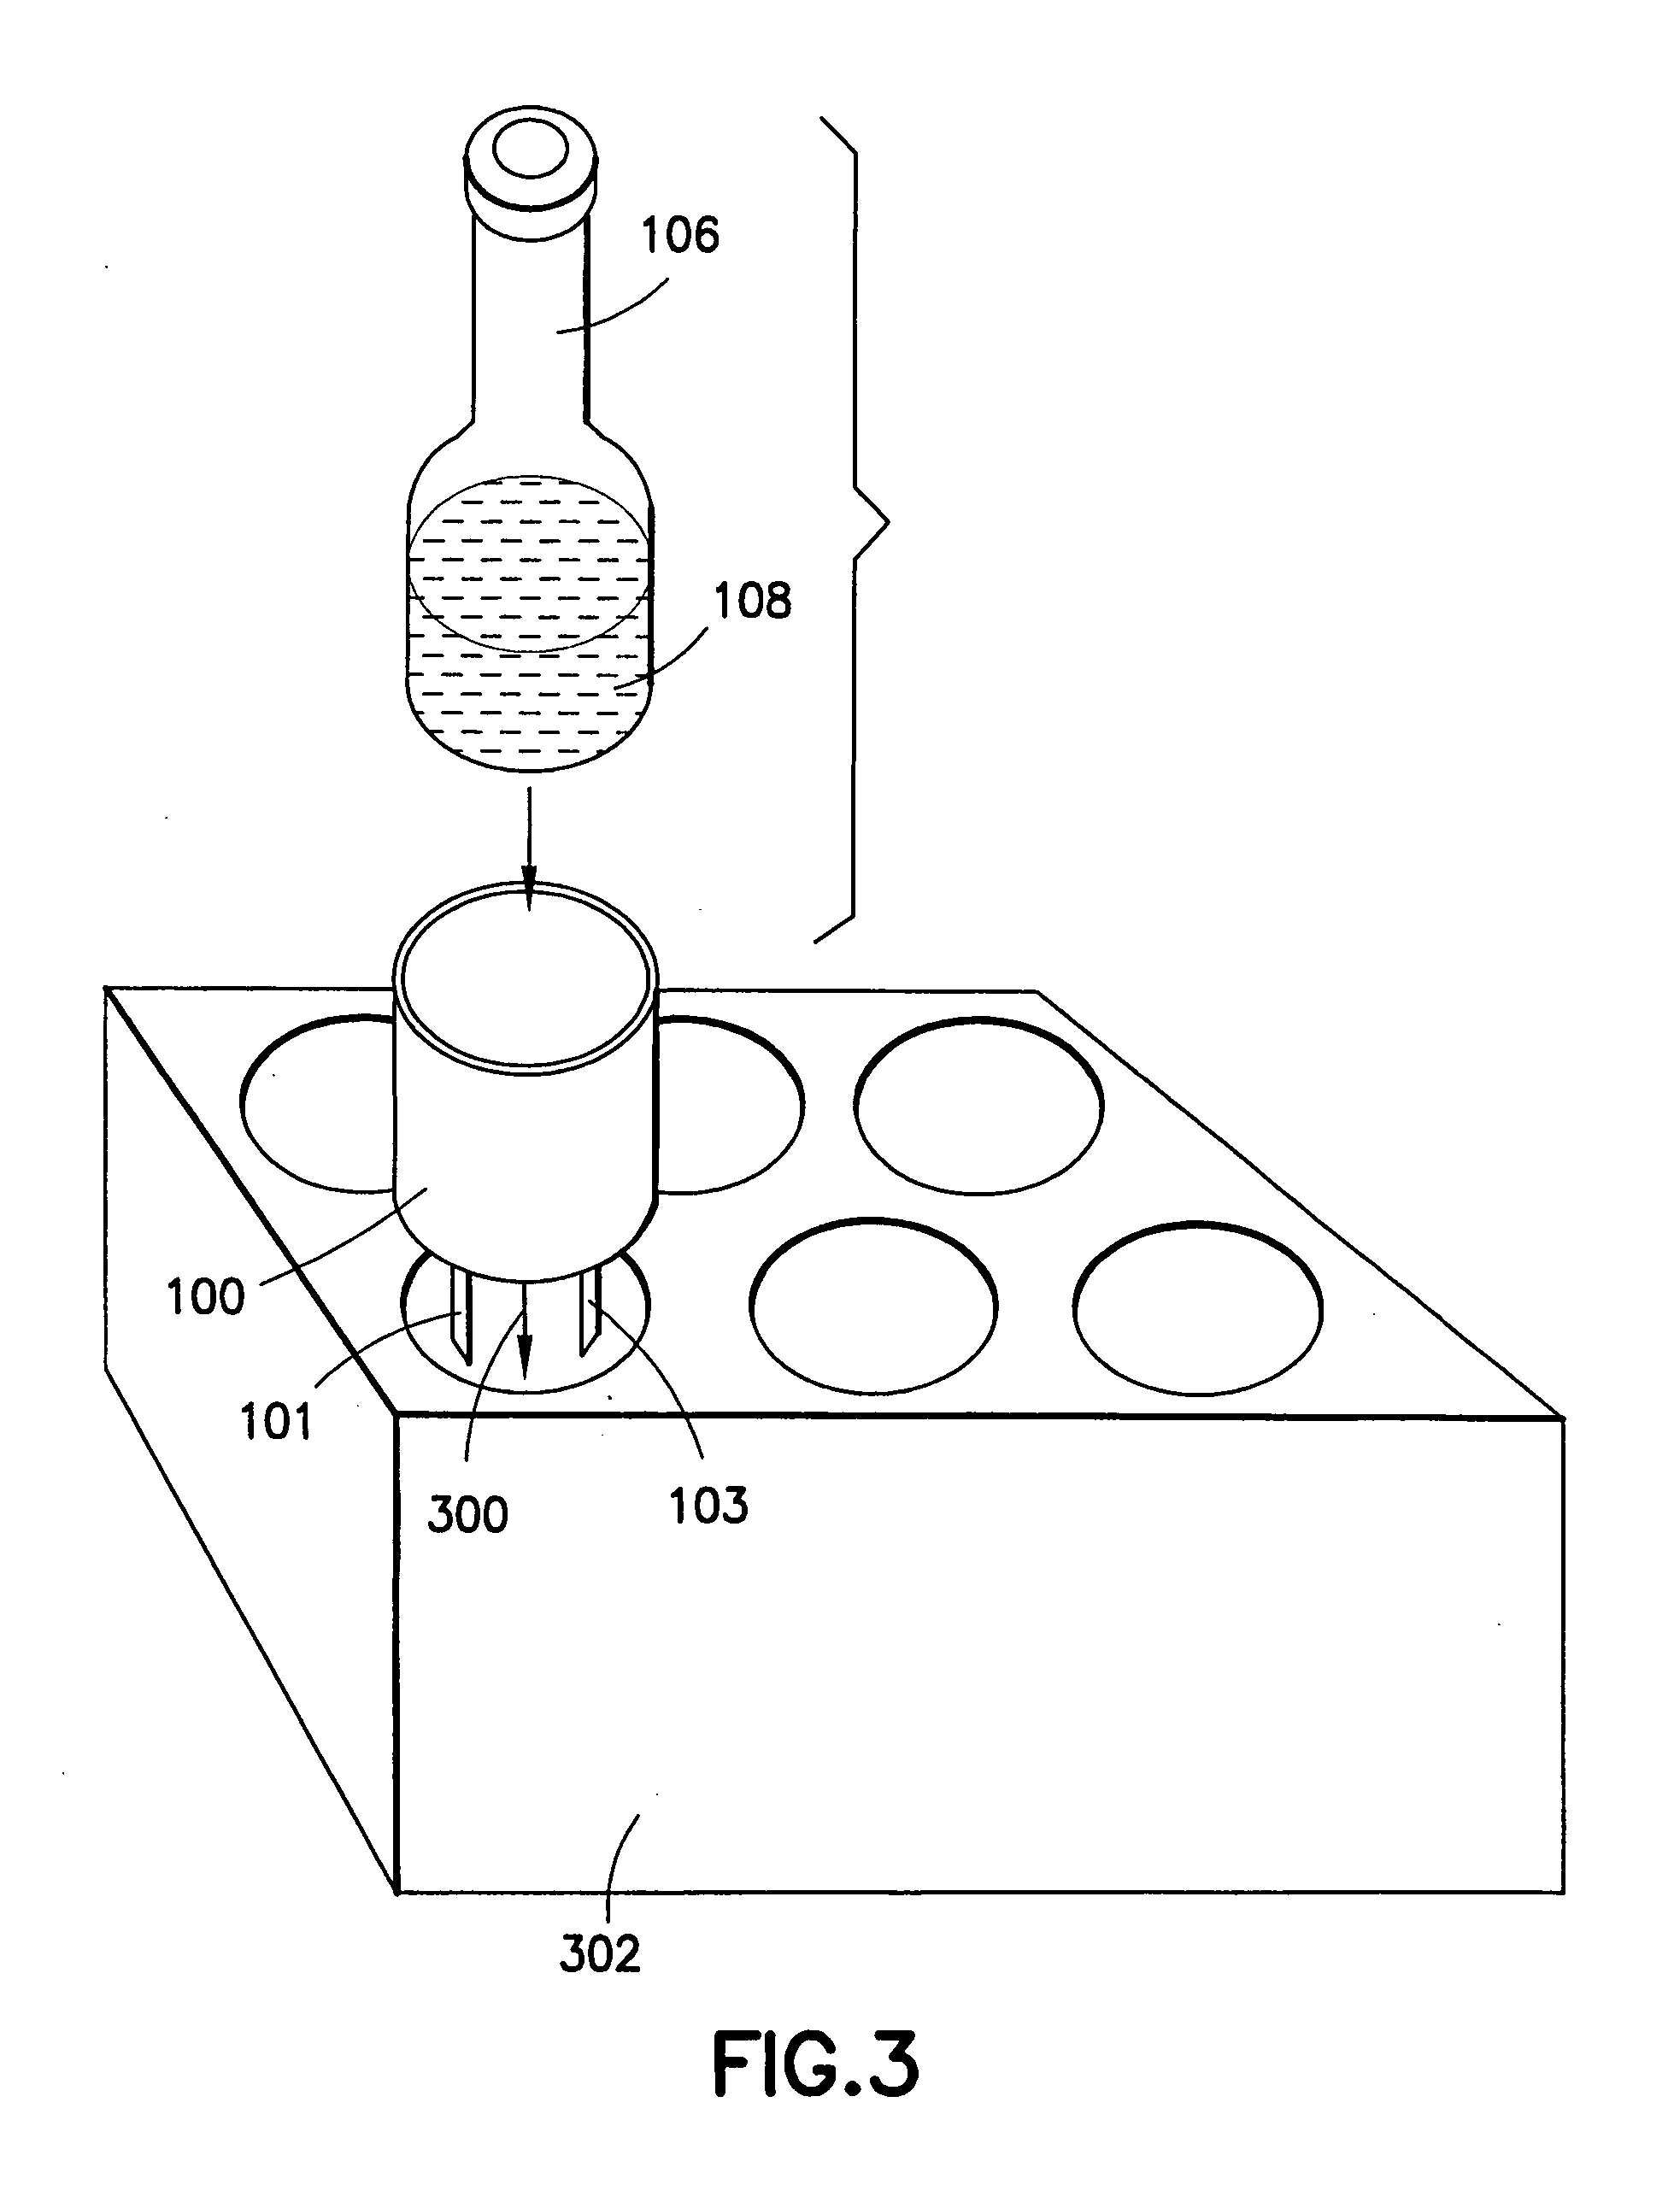 Detection method and apparatus for detecting microbial growth